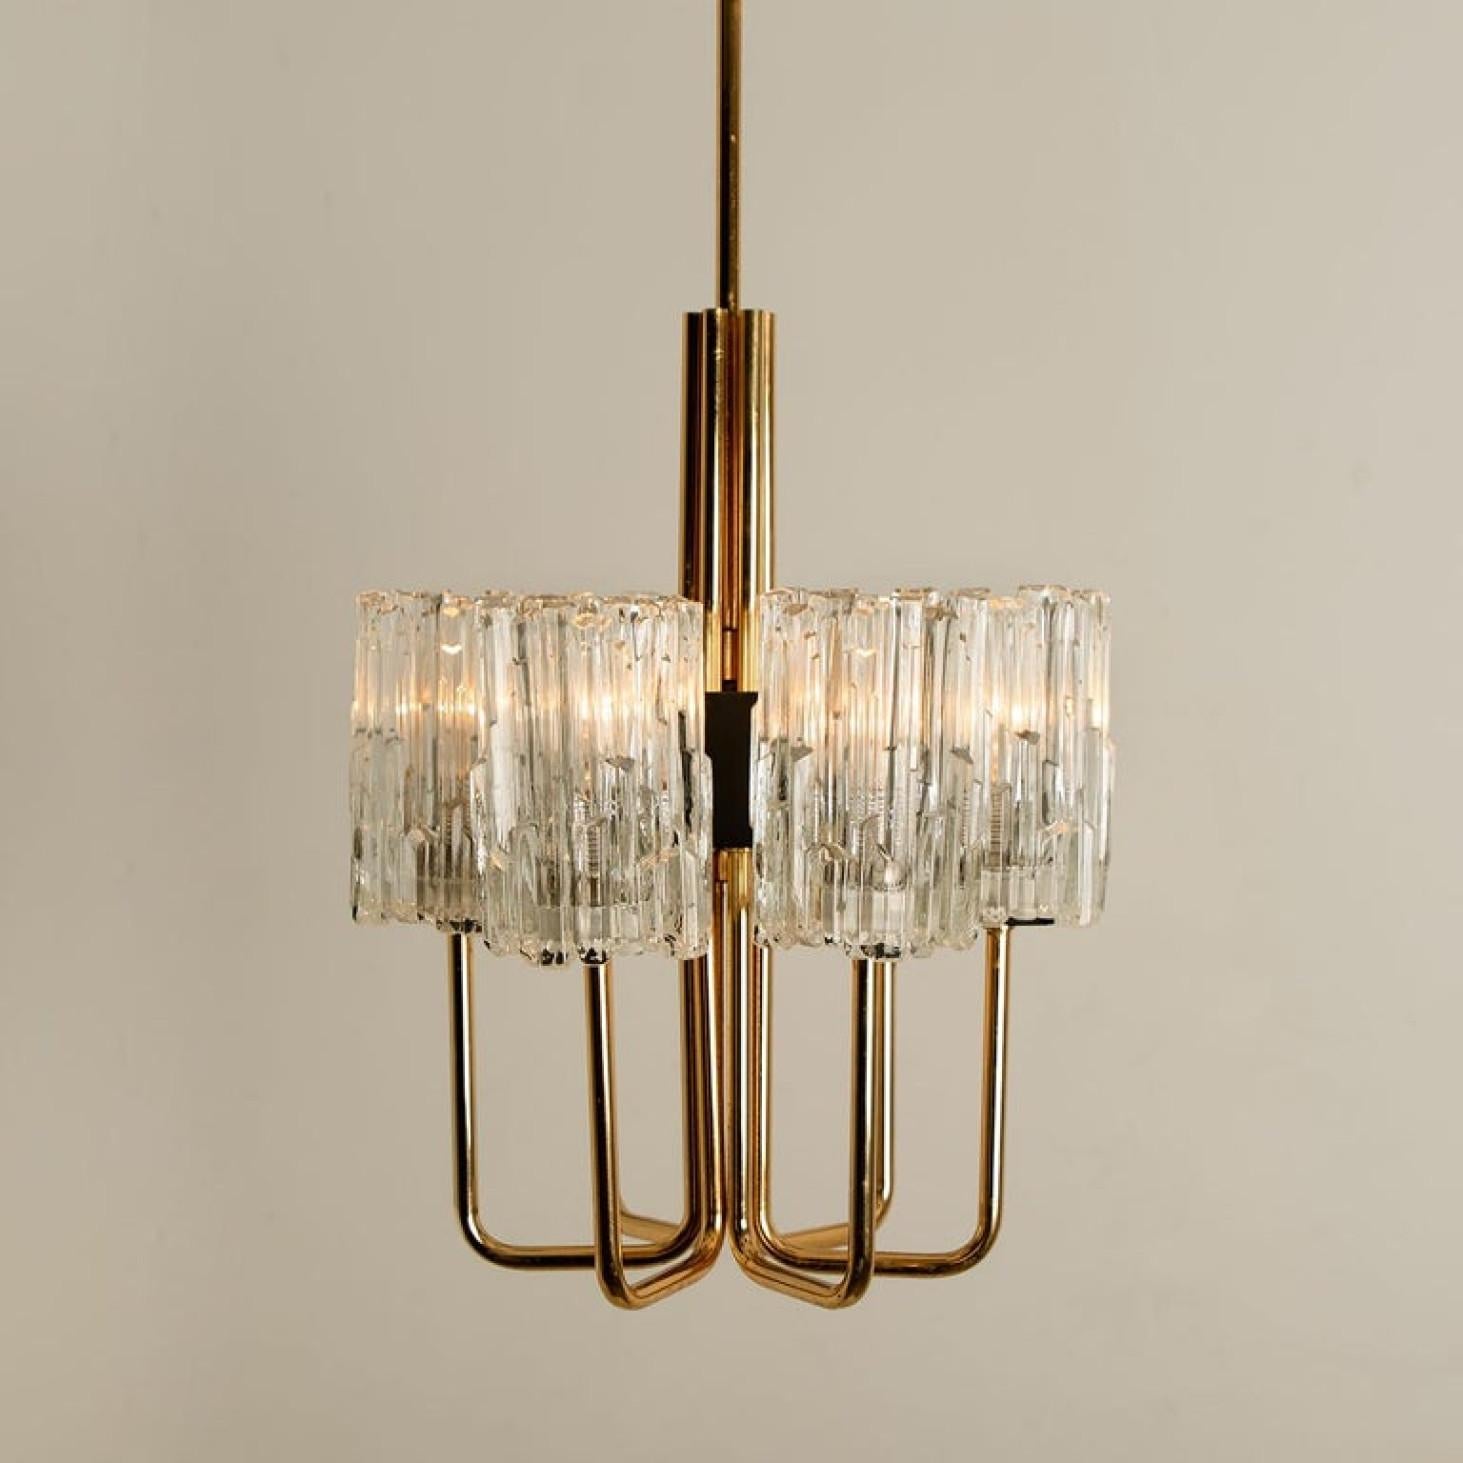 Midcentury Brass and Blown Glass Chandelier by Hillebrand, 1960s For Sale 1